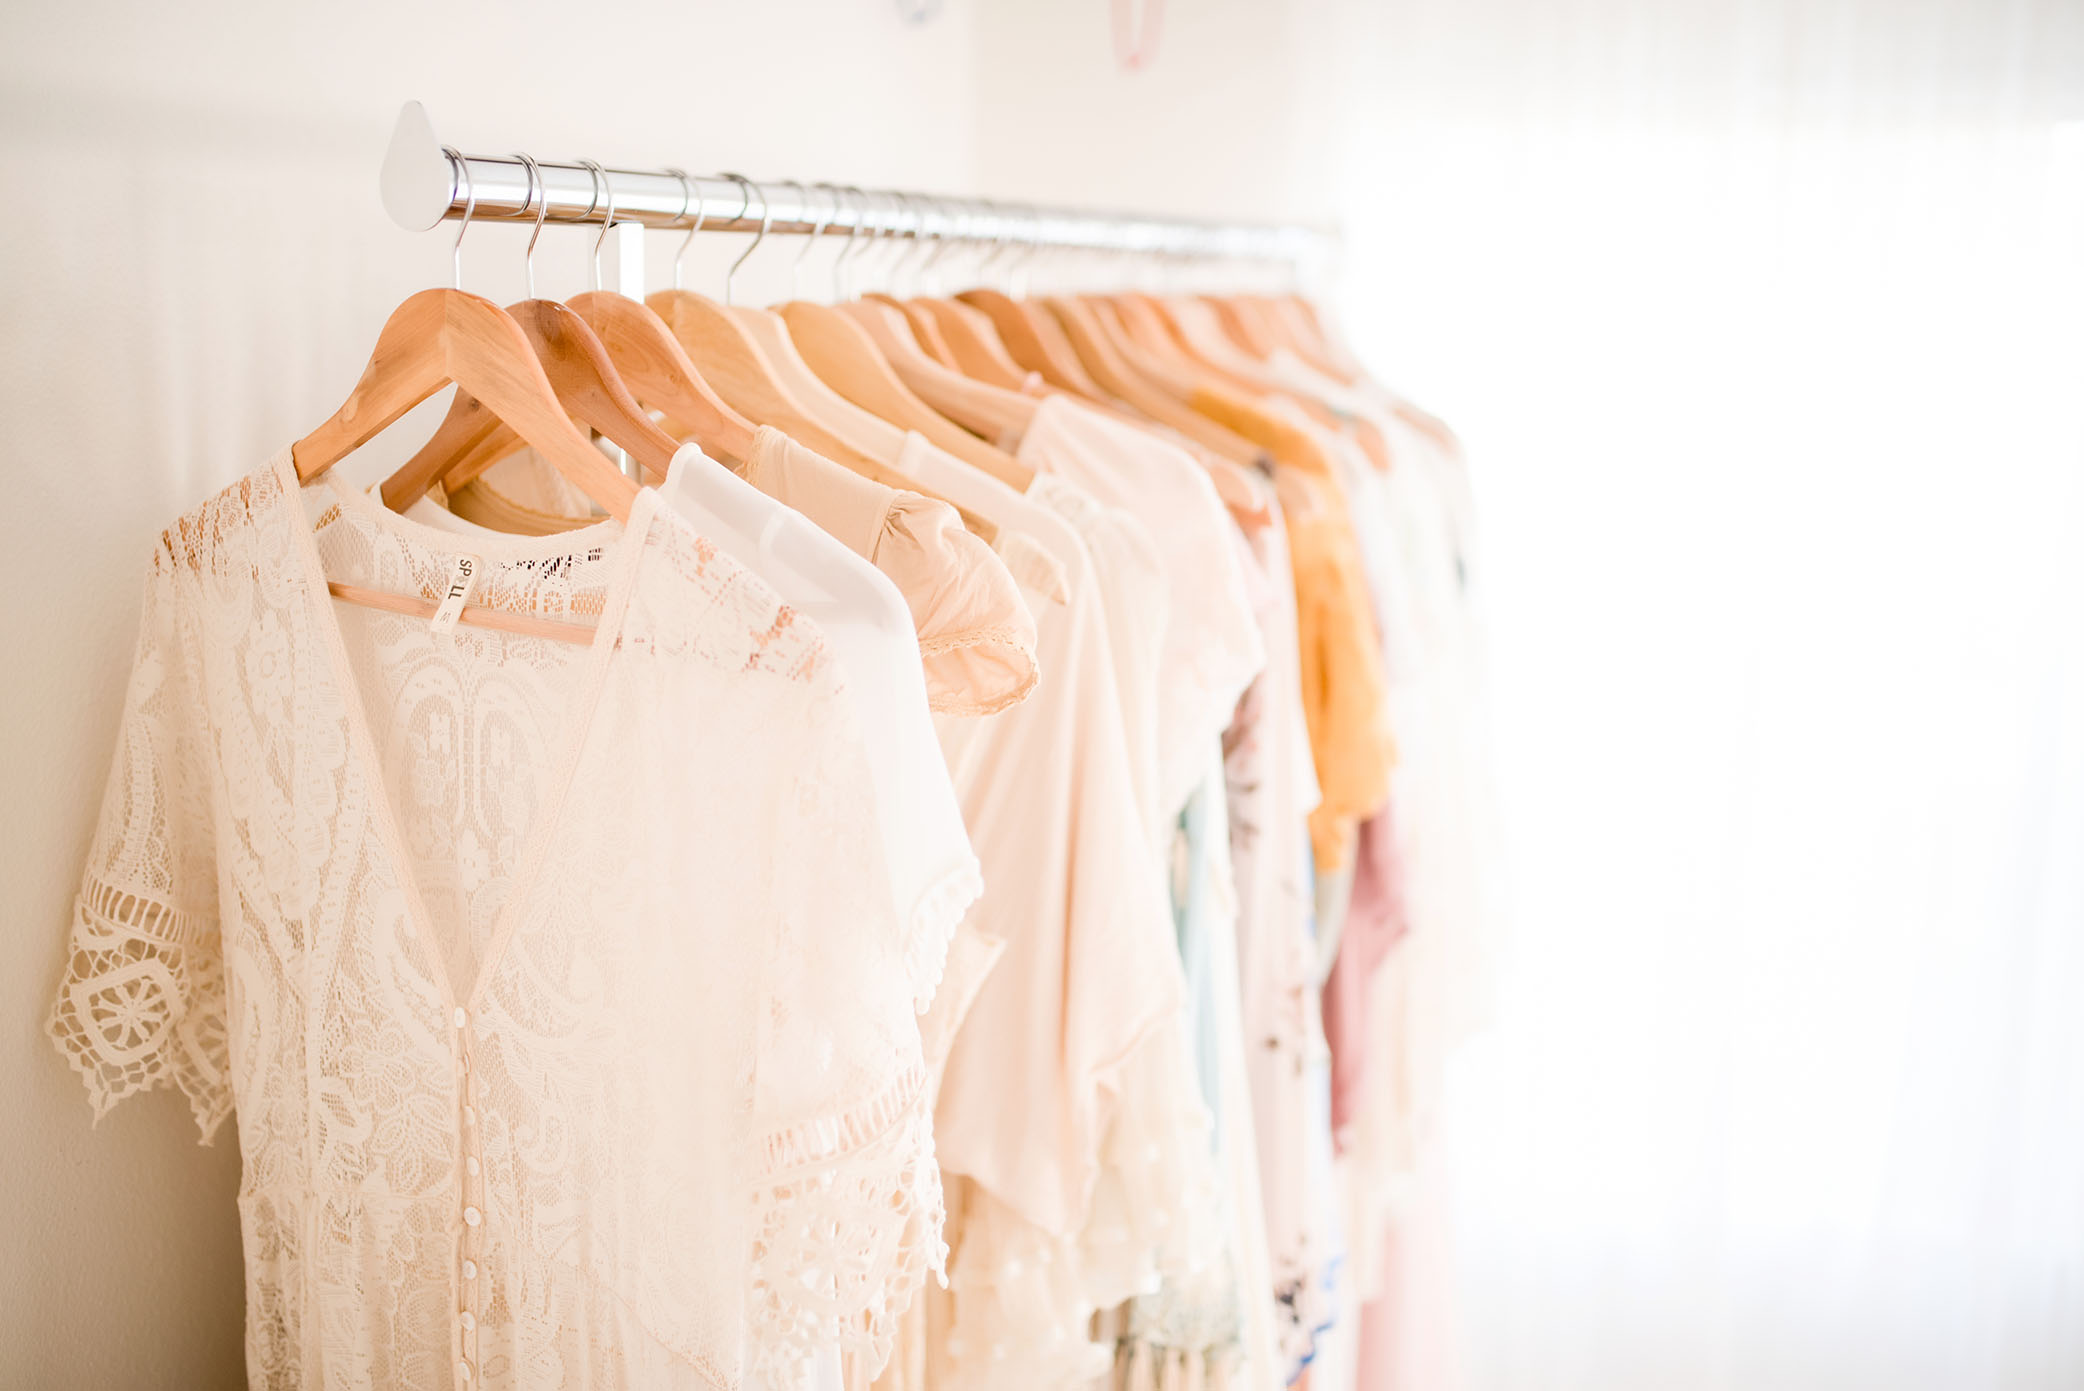 Clothes hang on a rack, captured by Sweet Beginnings Photography by Stephanie, a Sacramento Newborn and Family Photographer